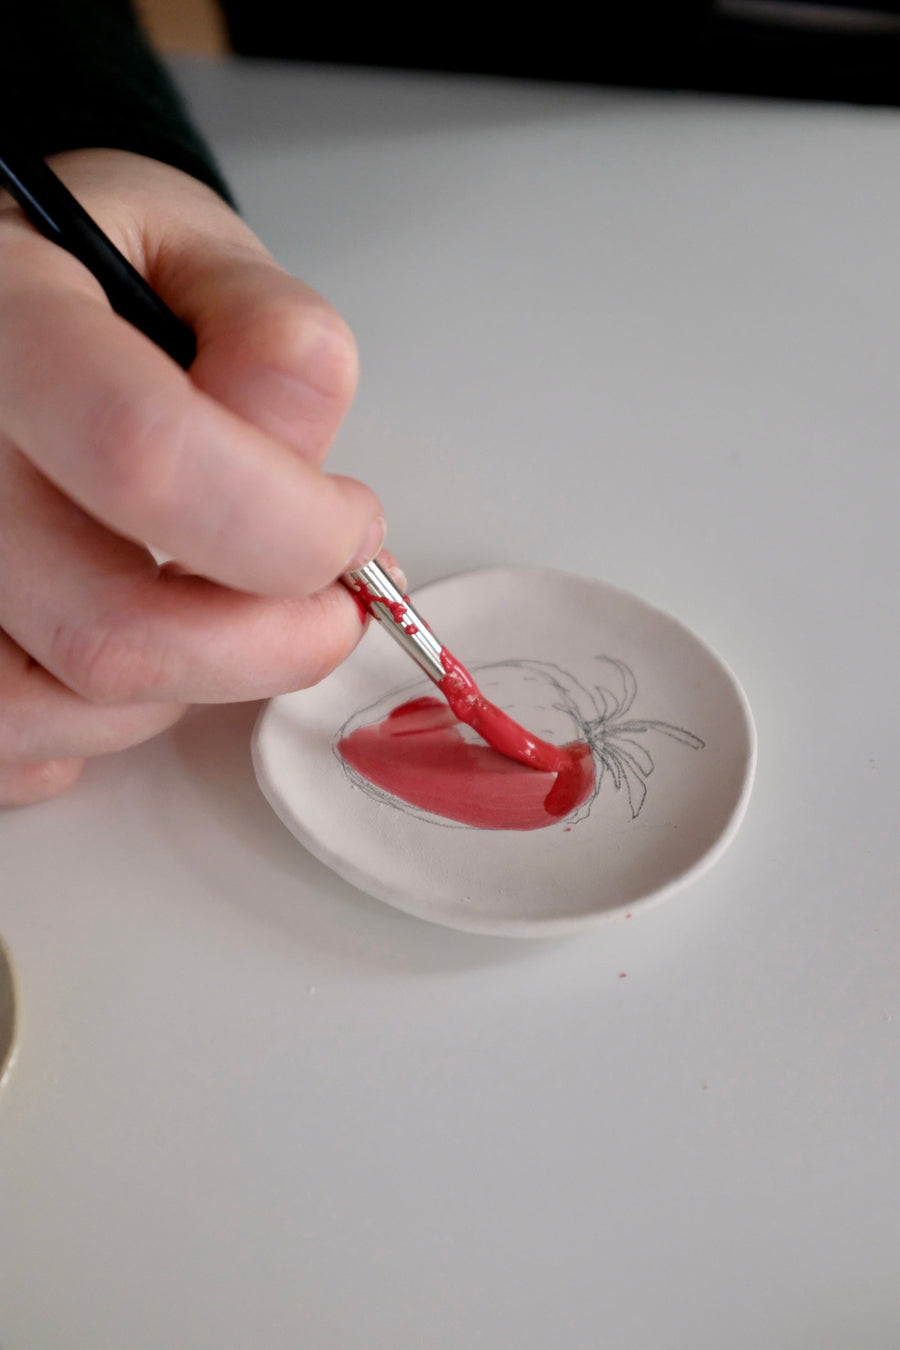 Painting Pottery